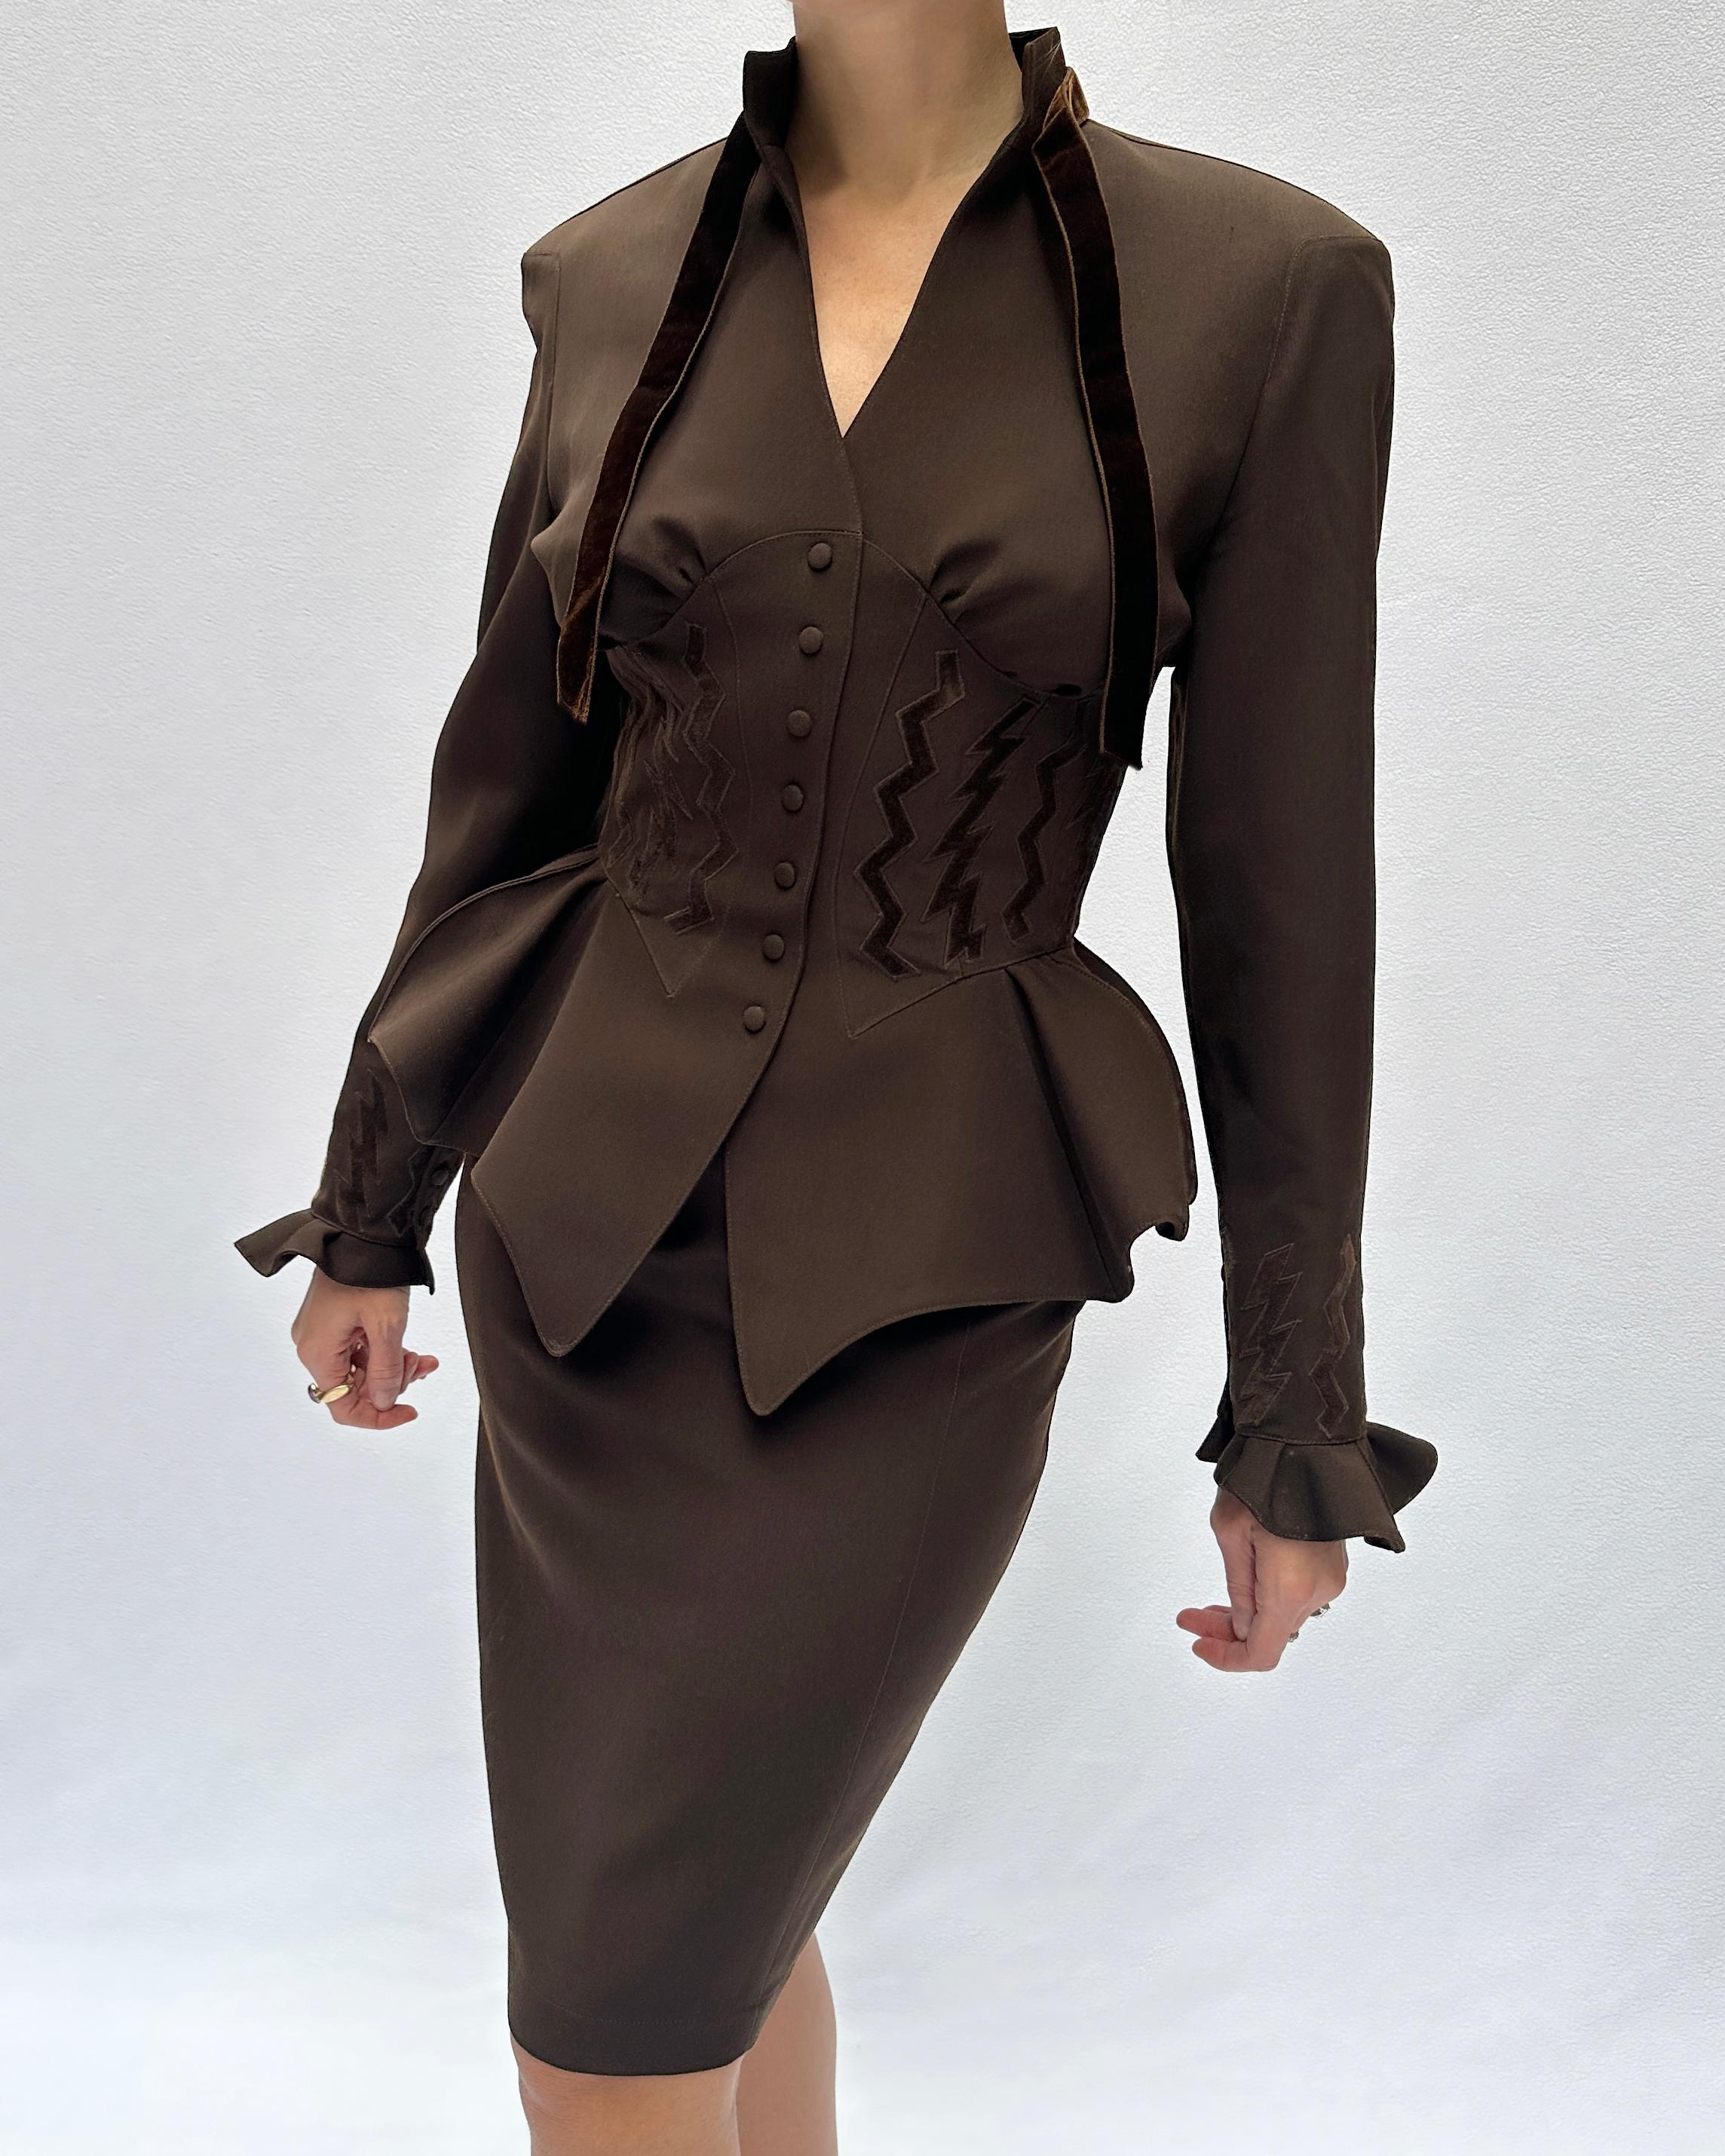 This Thierry Mugler skirt suit, from the Autumn 1992 couture collection, is a classic example of what made Mugler such a visionary of his era. It's a rare work of couture,  and a truly breathtaking collector's item, an especially iconic look from